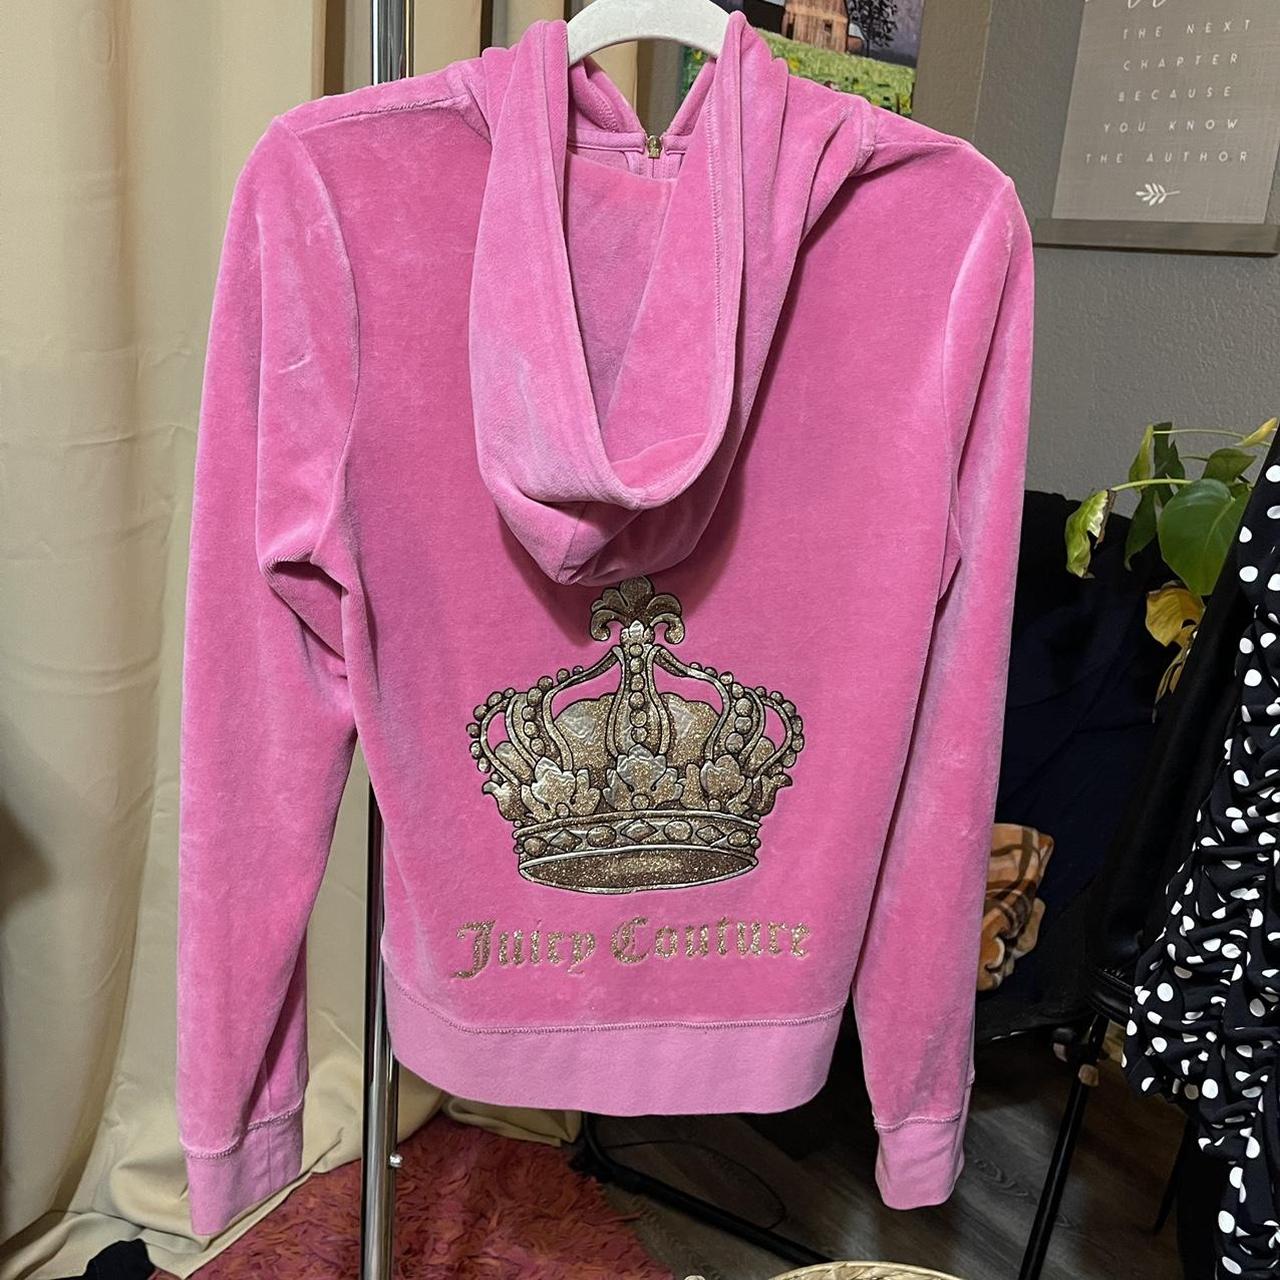 Juicy Couture Women's Pink and Gold Jumper